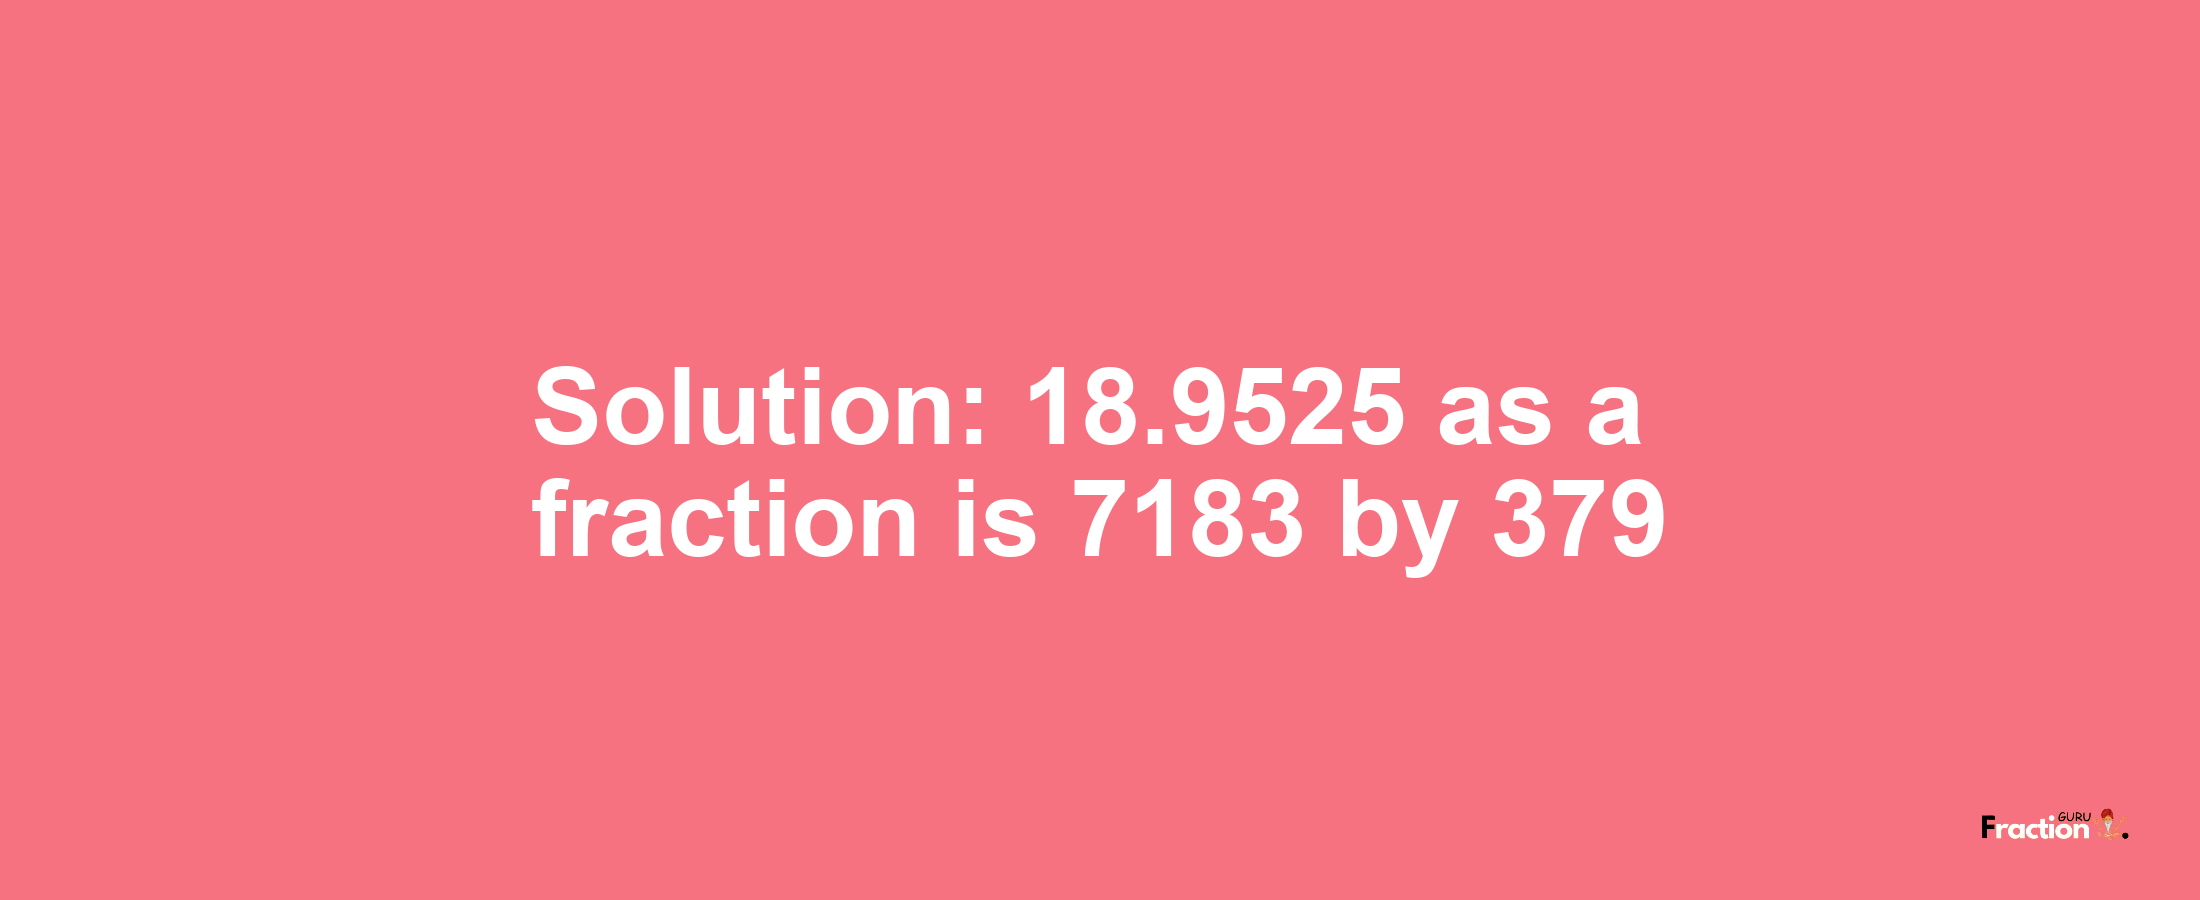 Solution:18.9525 as a fraction is 7183/379